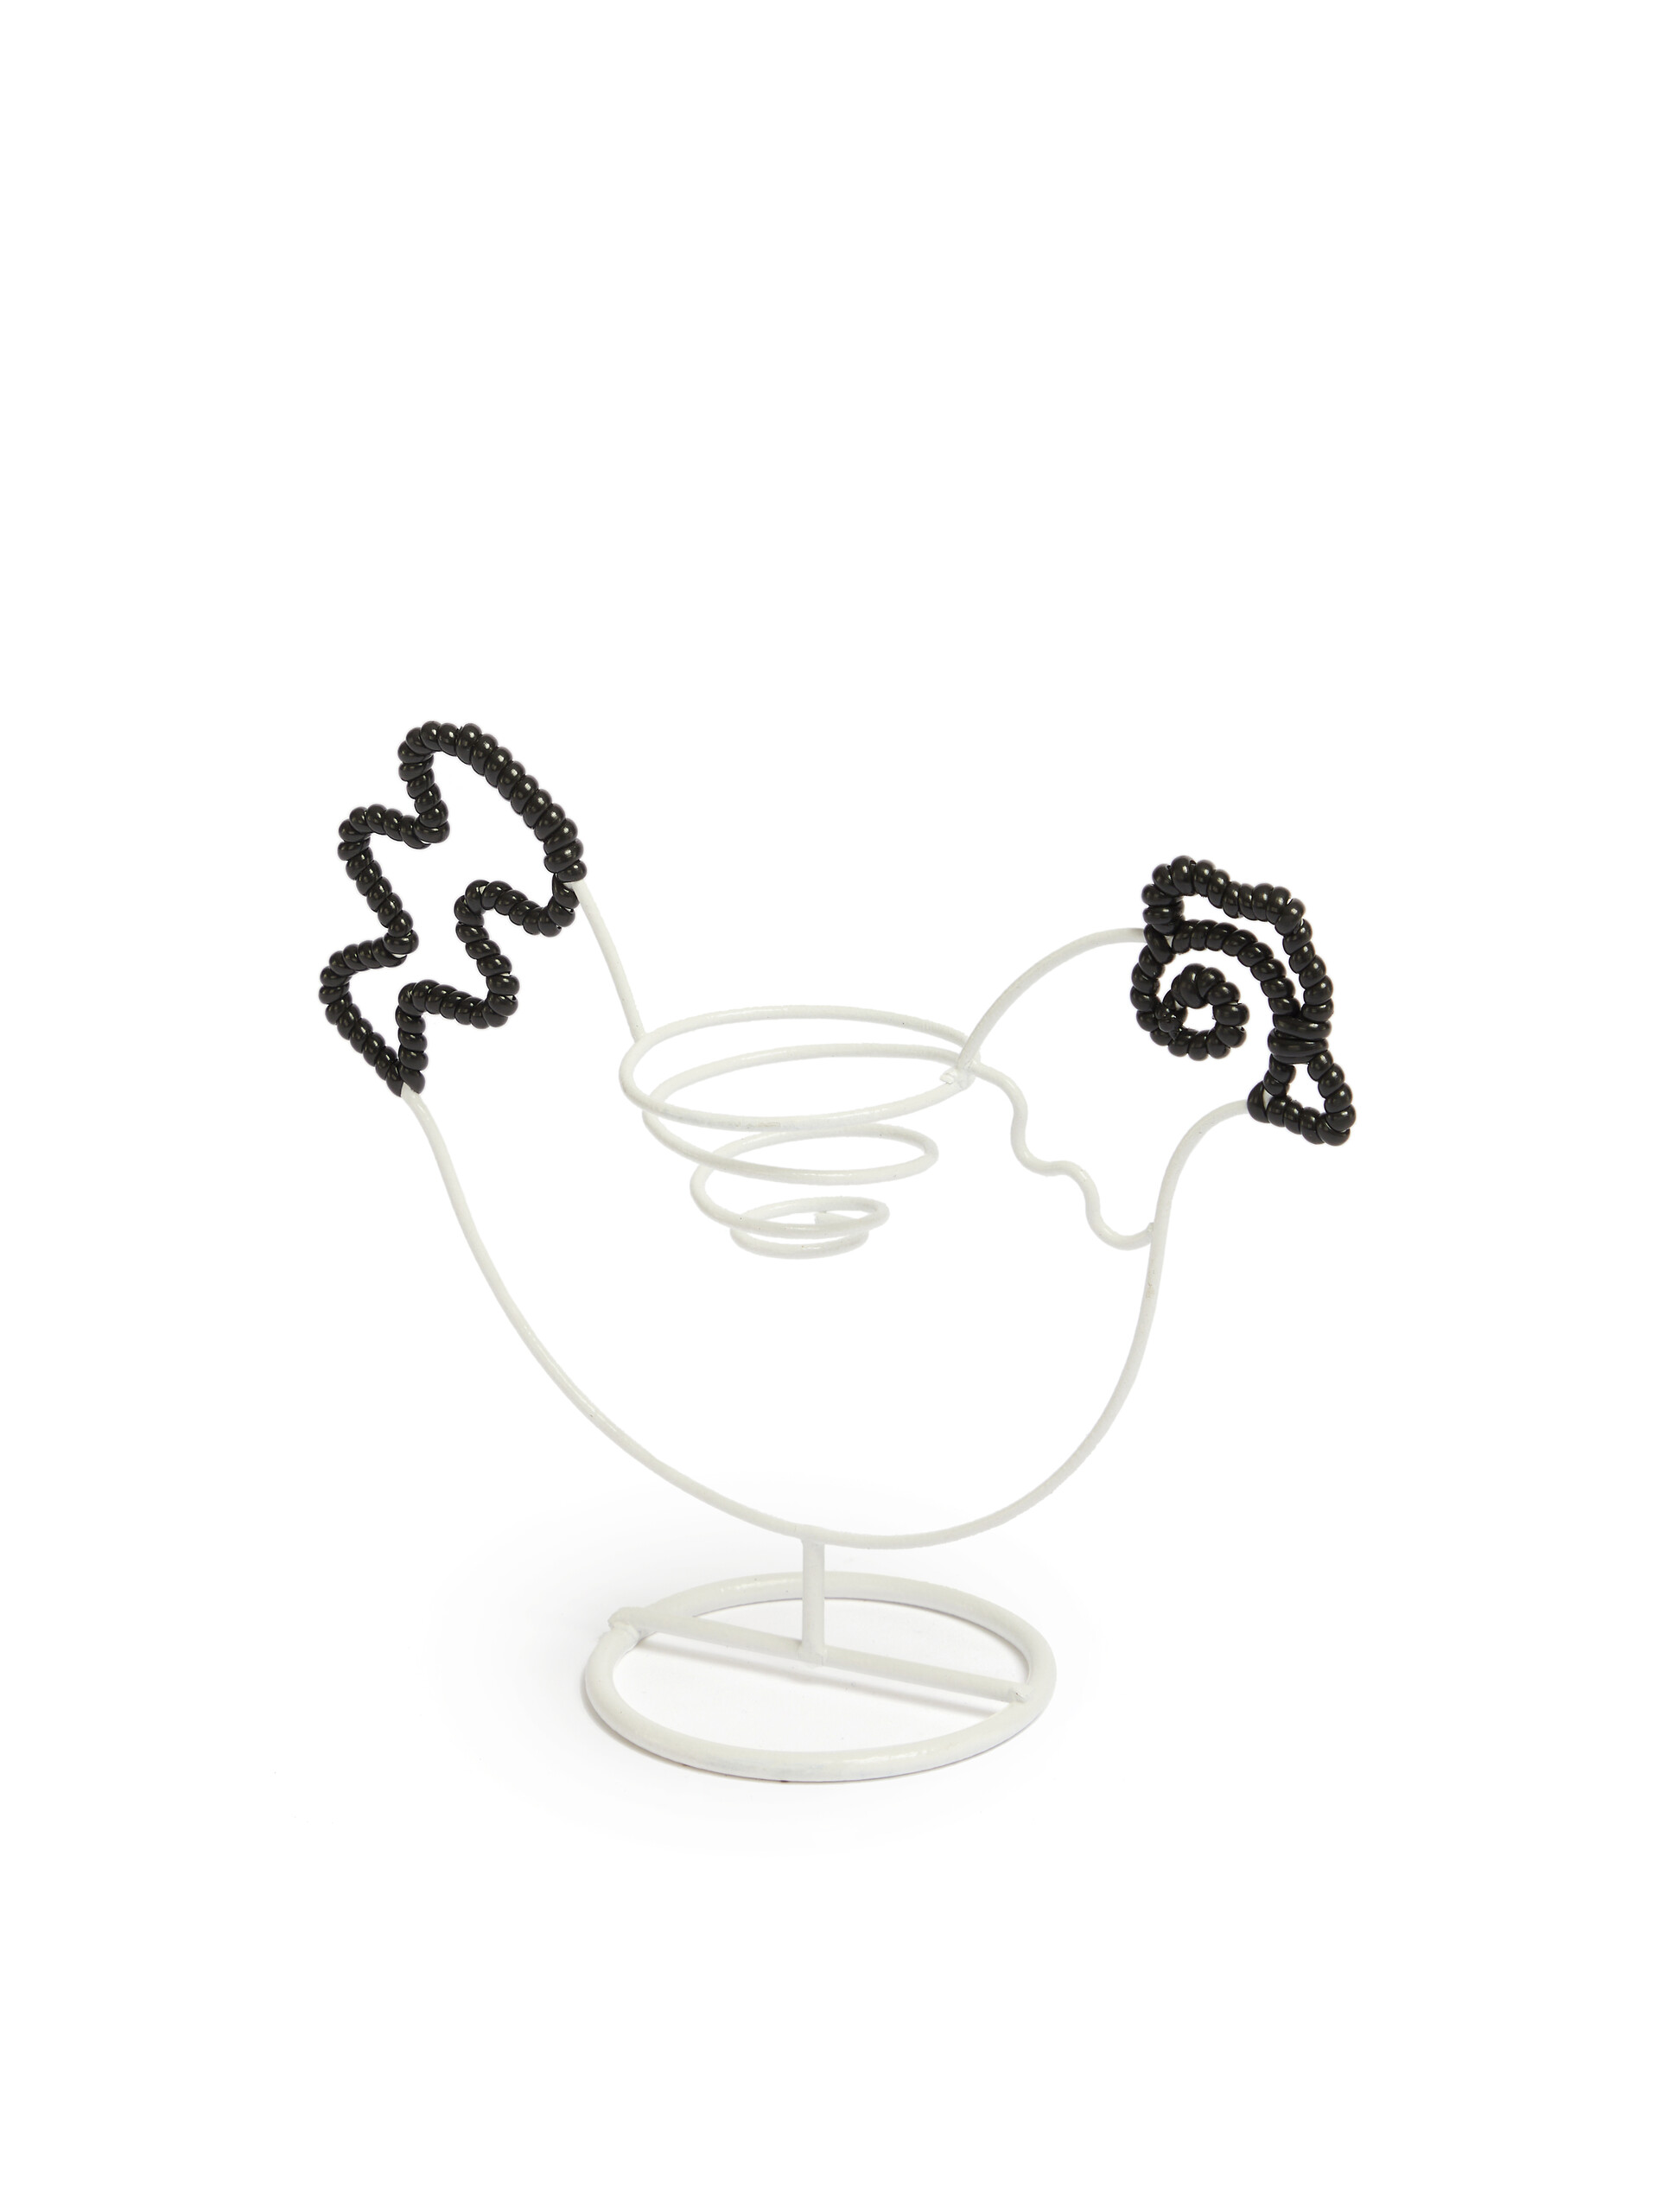 Black and white Marni Market Wire Egg Cup - Furniture - Image 3